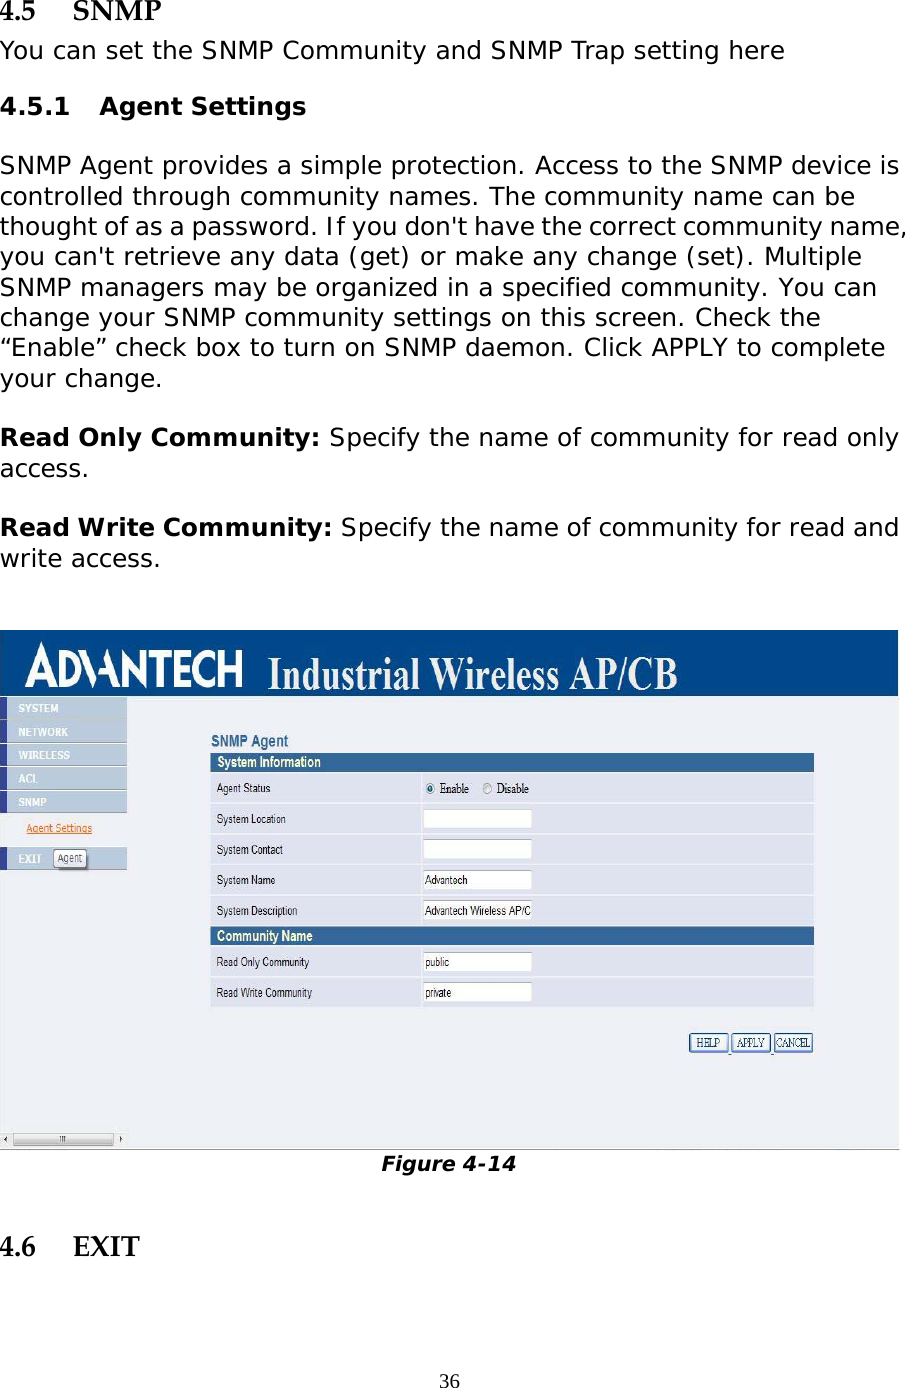                   4.5 SNMP You can set the SNMP Community and SNMP Trap setting here 4.5.1 Agent Settings SNMP Agent provides a simple protection. Access to the SNMP device is controlled through community names. The community name can be thought of as a password. If you don&apos;t have the correct community name, you can&apos;t retrieve any data (get) or make any change (set). Multiple SNMP managers may be organized in a specified community. You can change your SNMP community settings on this screen. Check the “Enable” check box to turn on SNMP daemon. Click APPLY to complete your change.  Read Only Community: Specify the name of community for read only access. Read Write Community: Specify the name of community for read and write access.    Figure 4-14  4.6 EXIT  36 